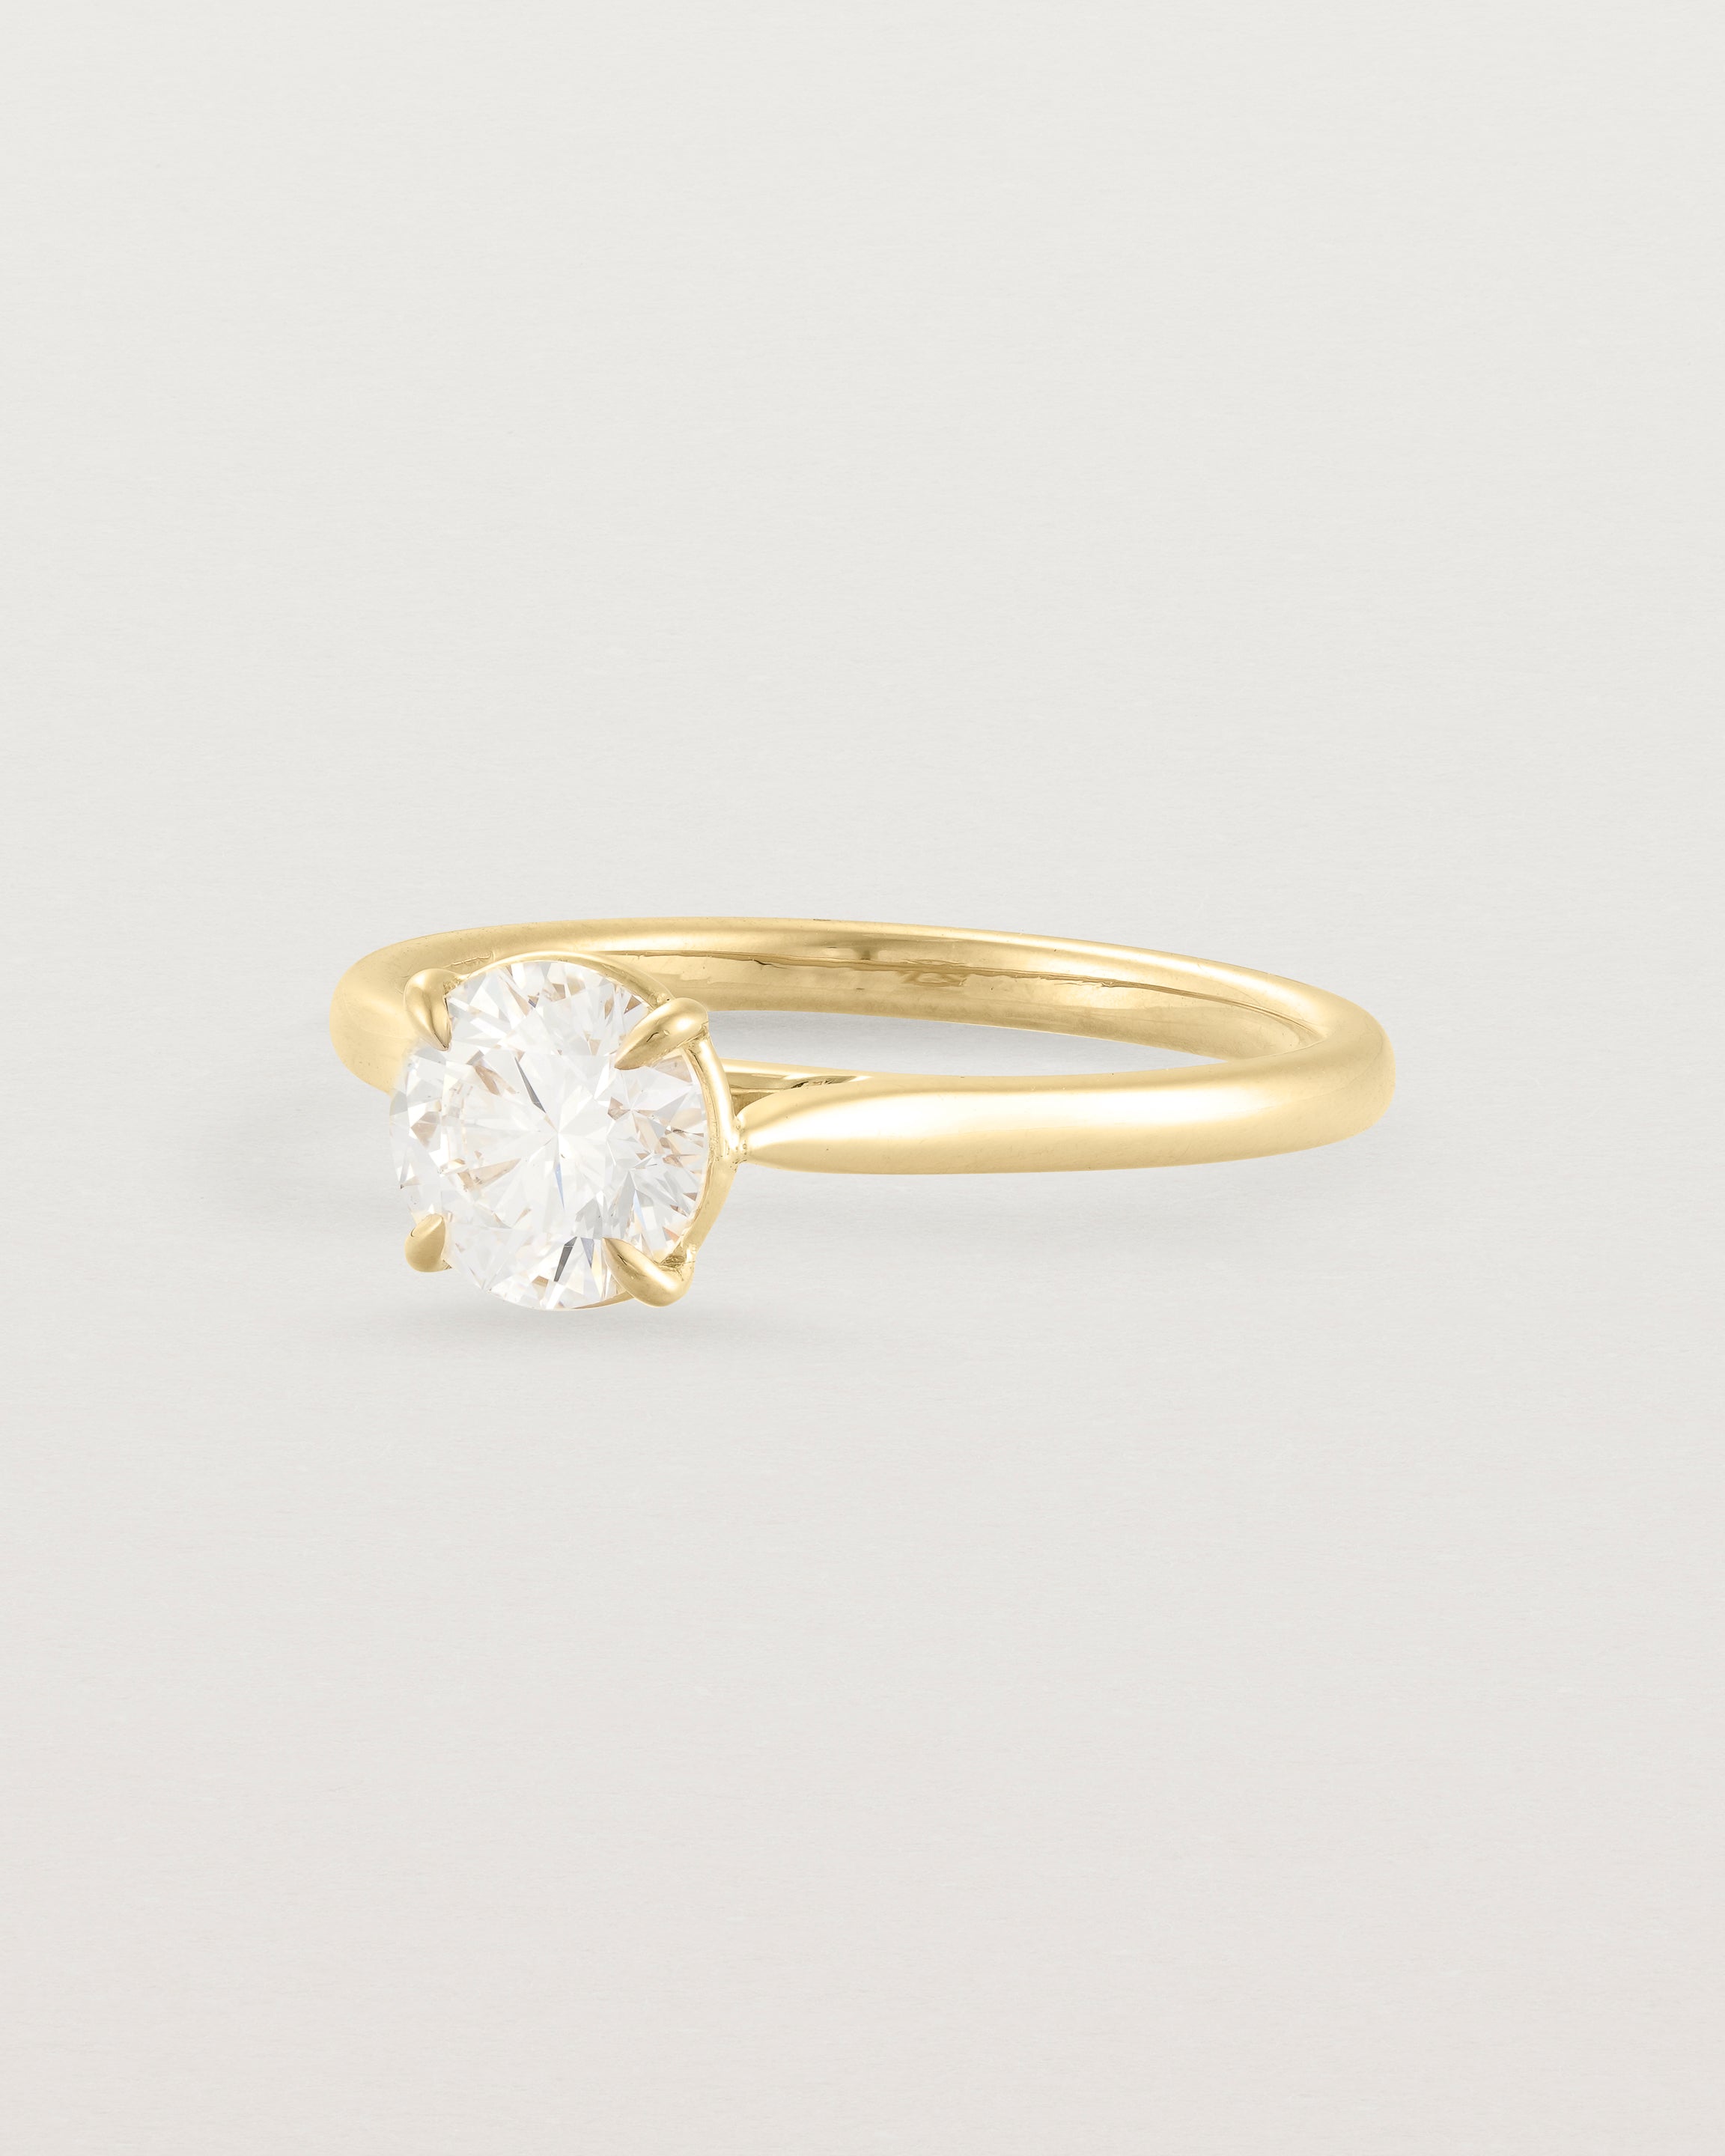 Side view of a 0.90ct round white diamond, adorns a 1.6mm half round 18ct Yellow Gold band.